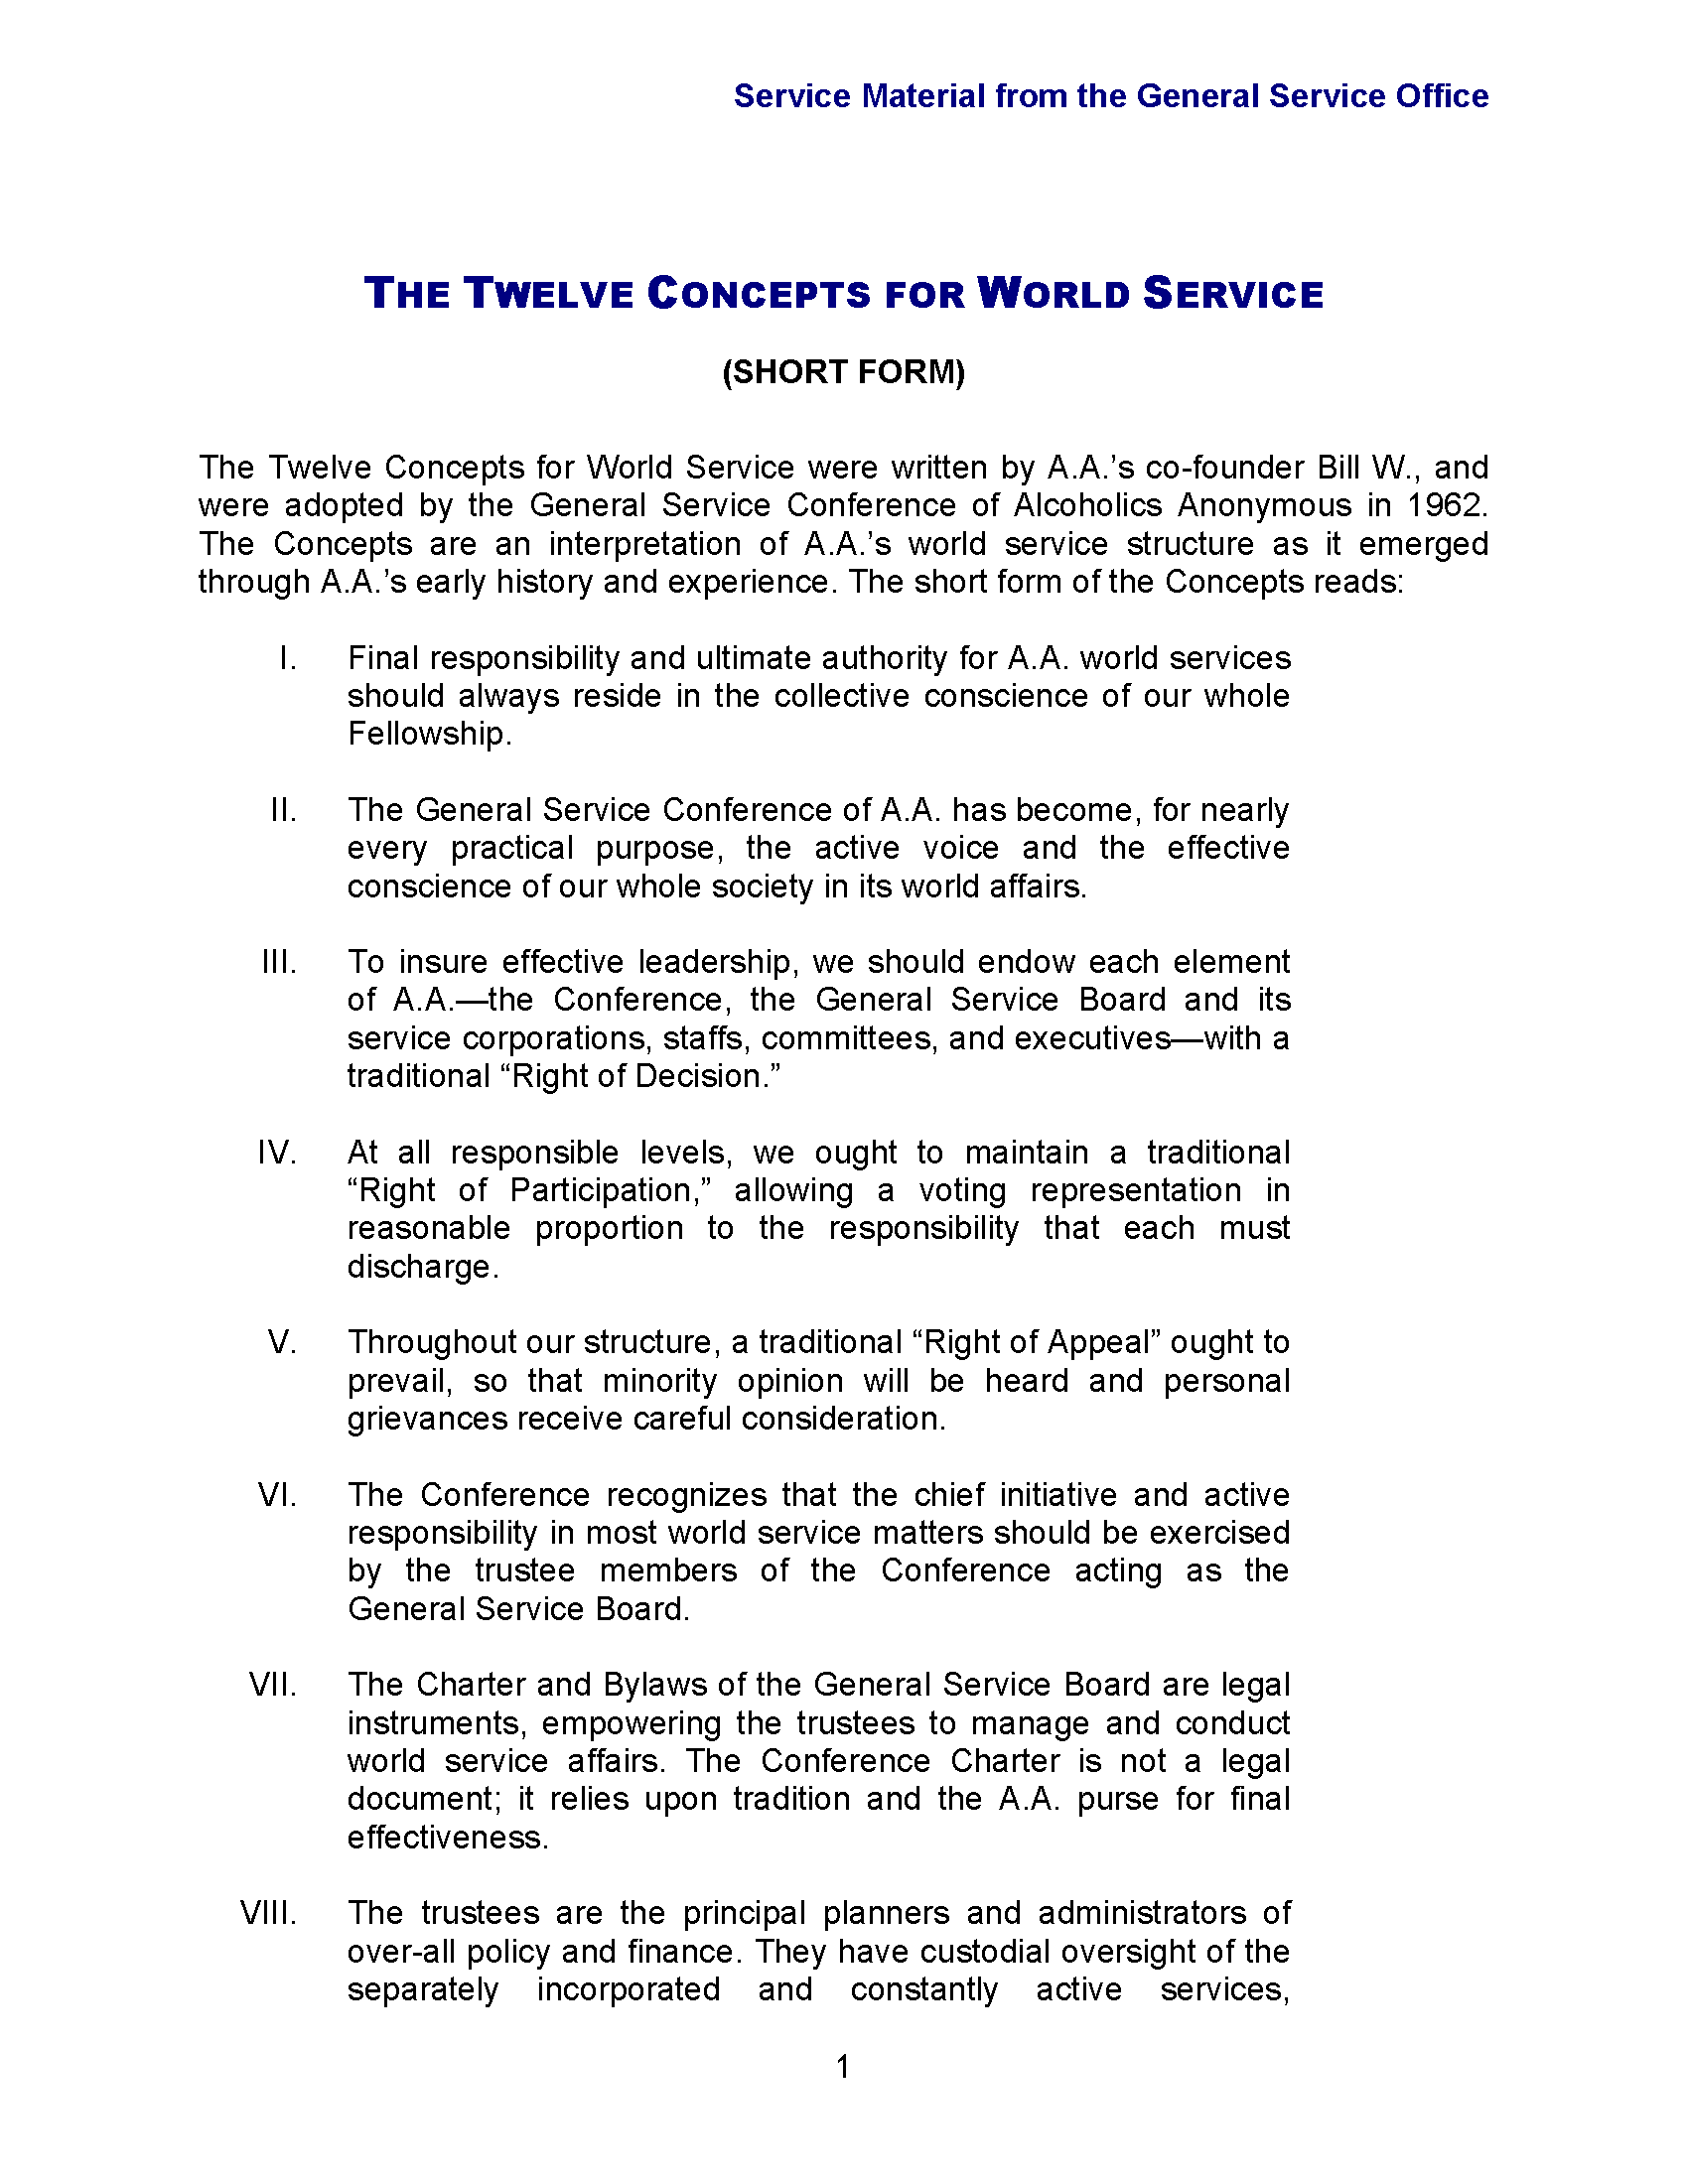 The Twelve Concepts for World Services (Short Form)